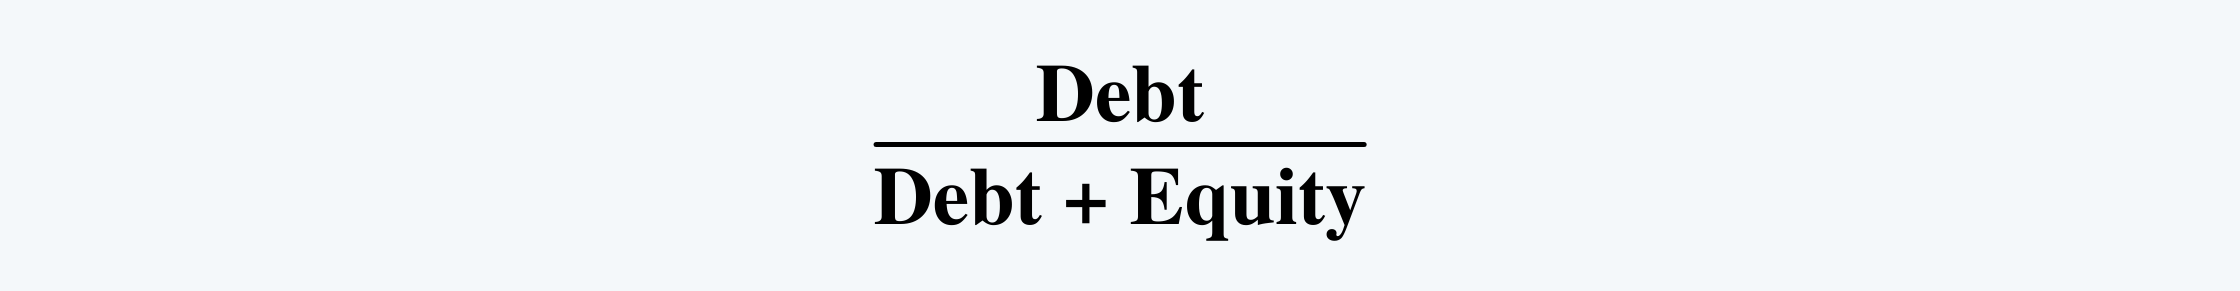 Debt to Total Capital FRA CFA Level 1 Study Notes